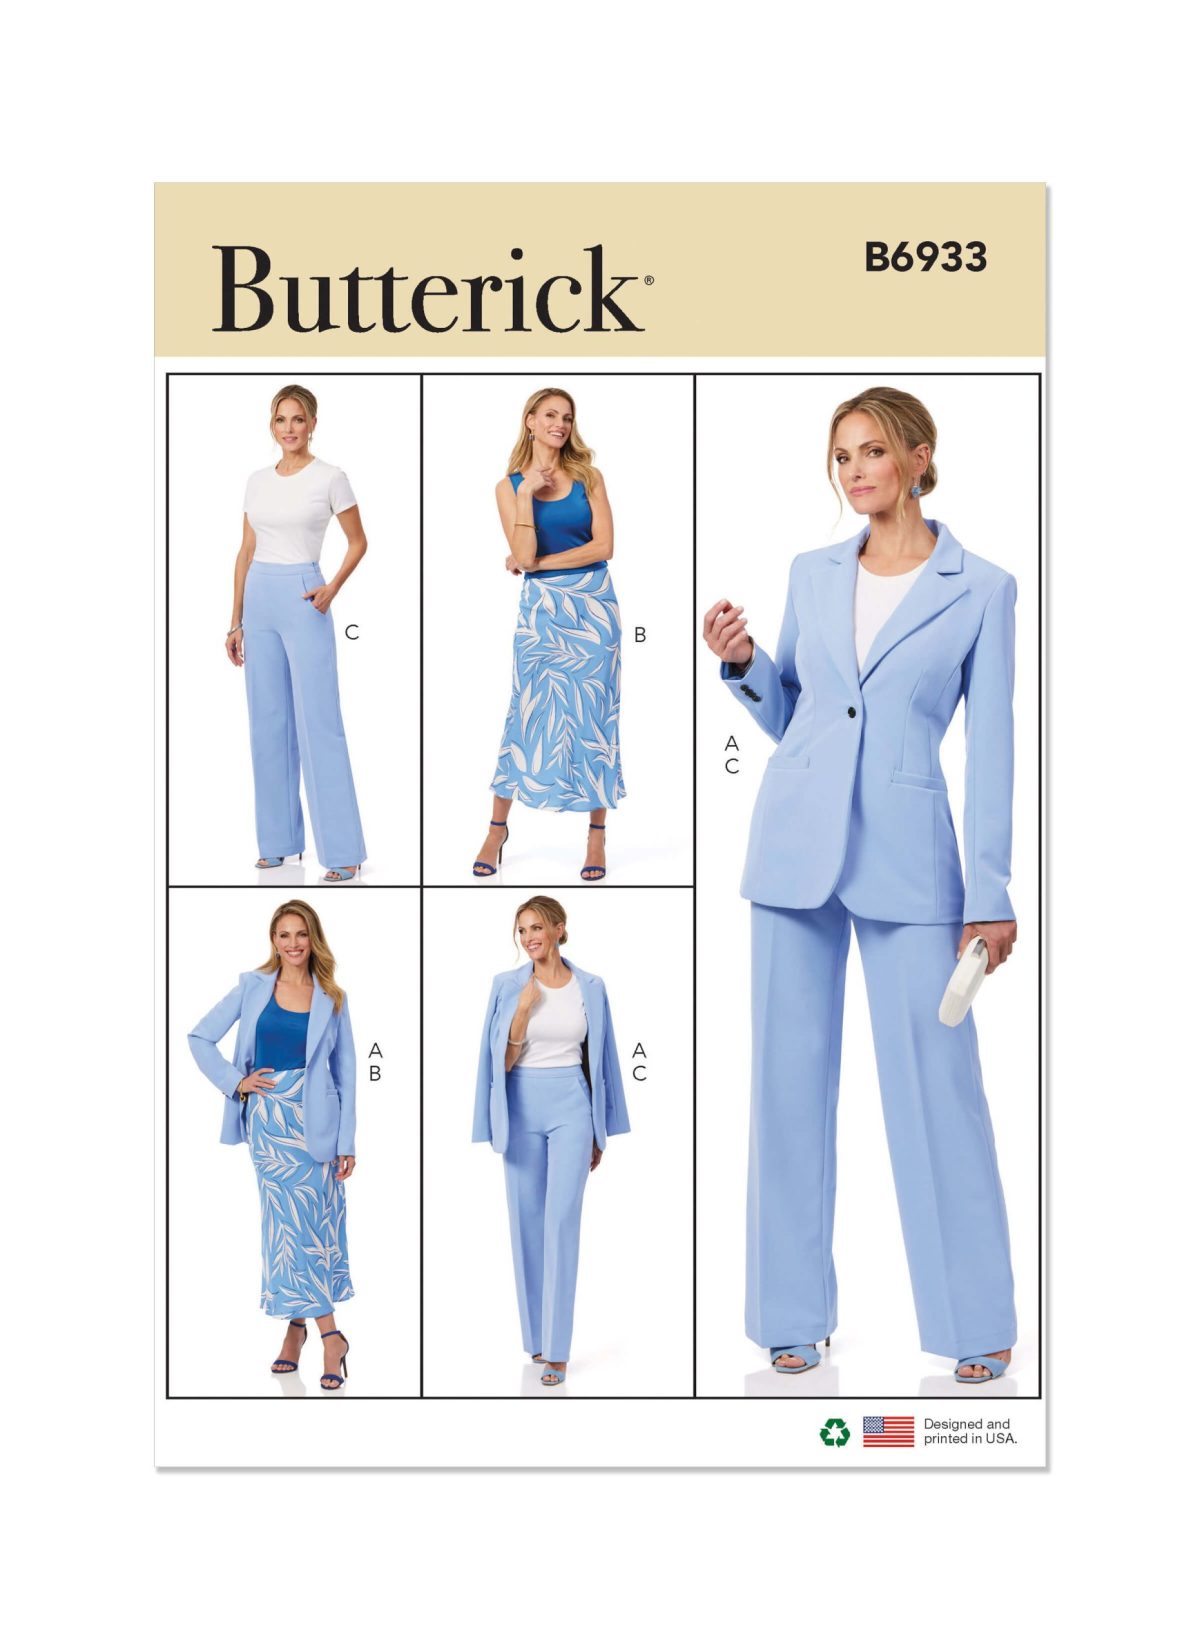 Butterick Sewing Pattern B6933 Misses' Jacket, Skirt and Trousers